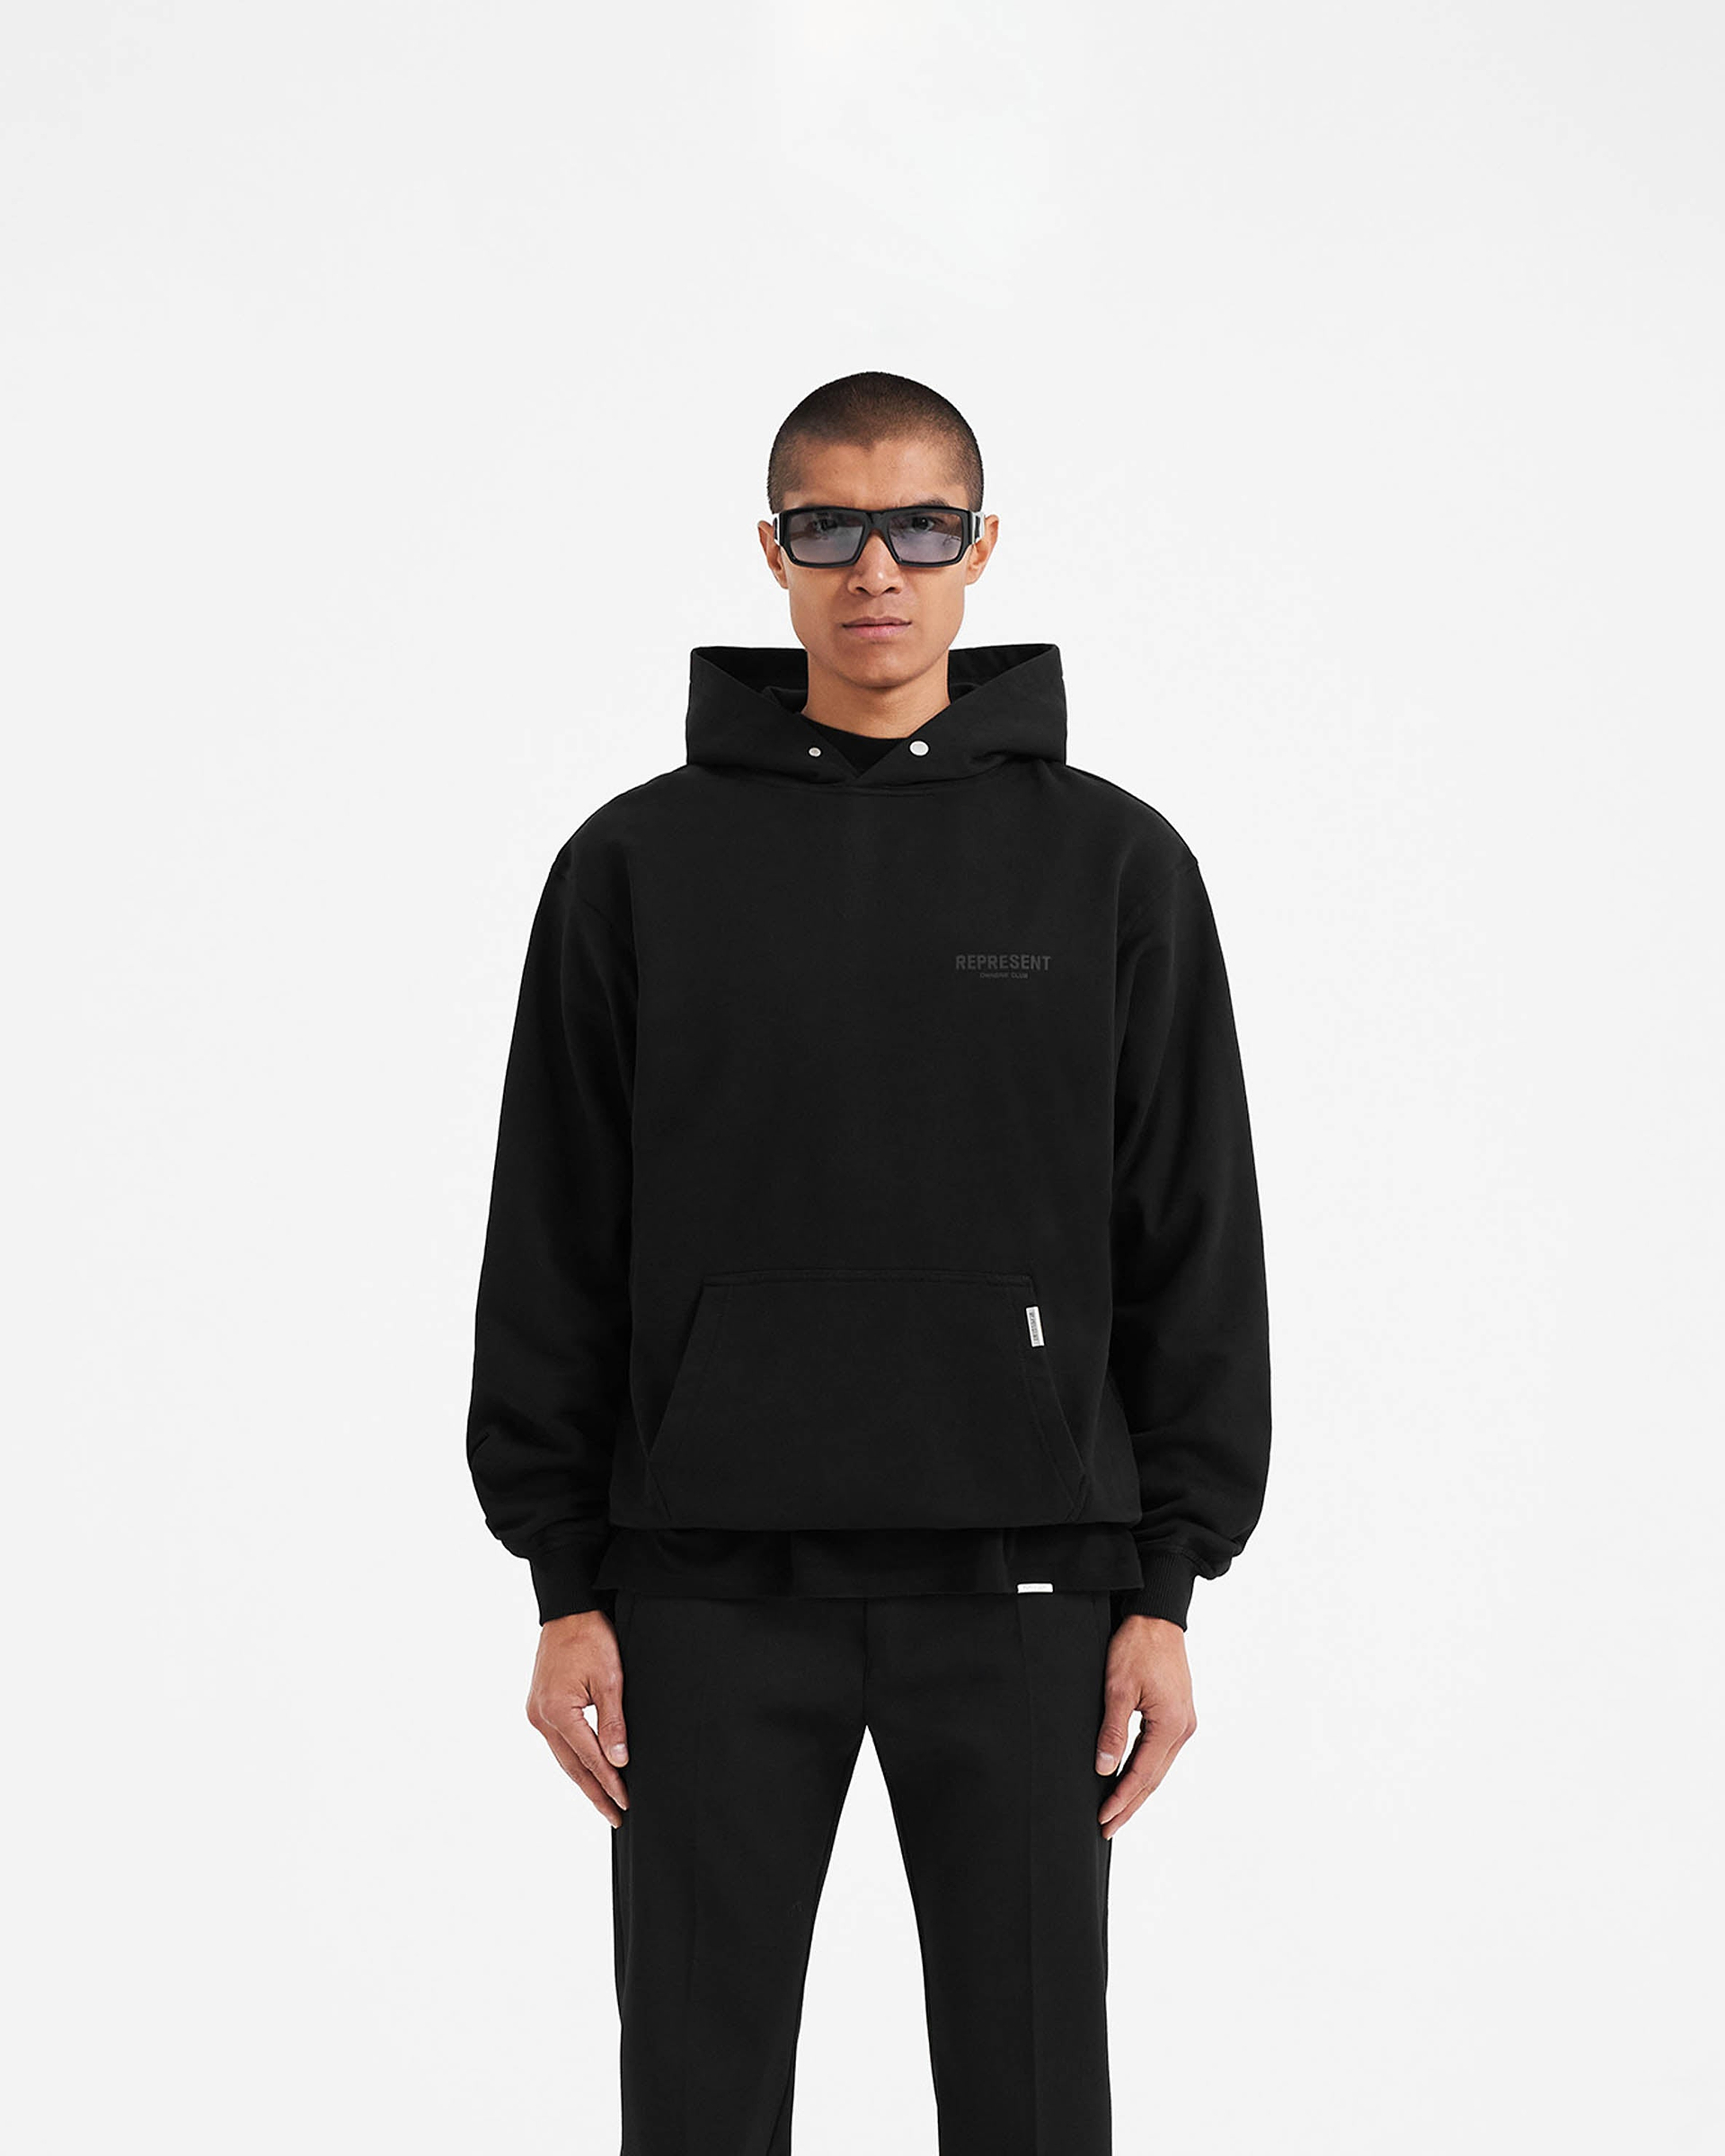 Black Reflective Hoodie | Owners' Club | REPRESENT CLO